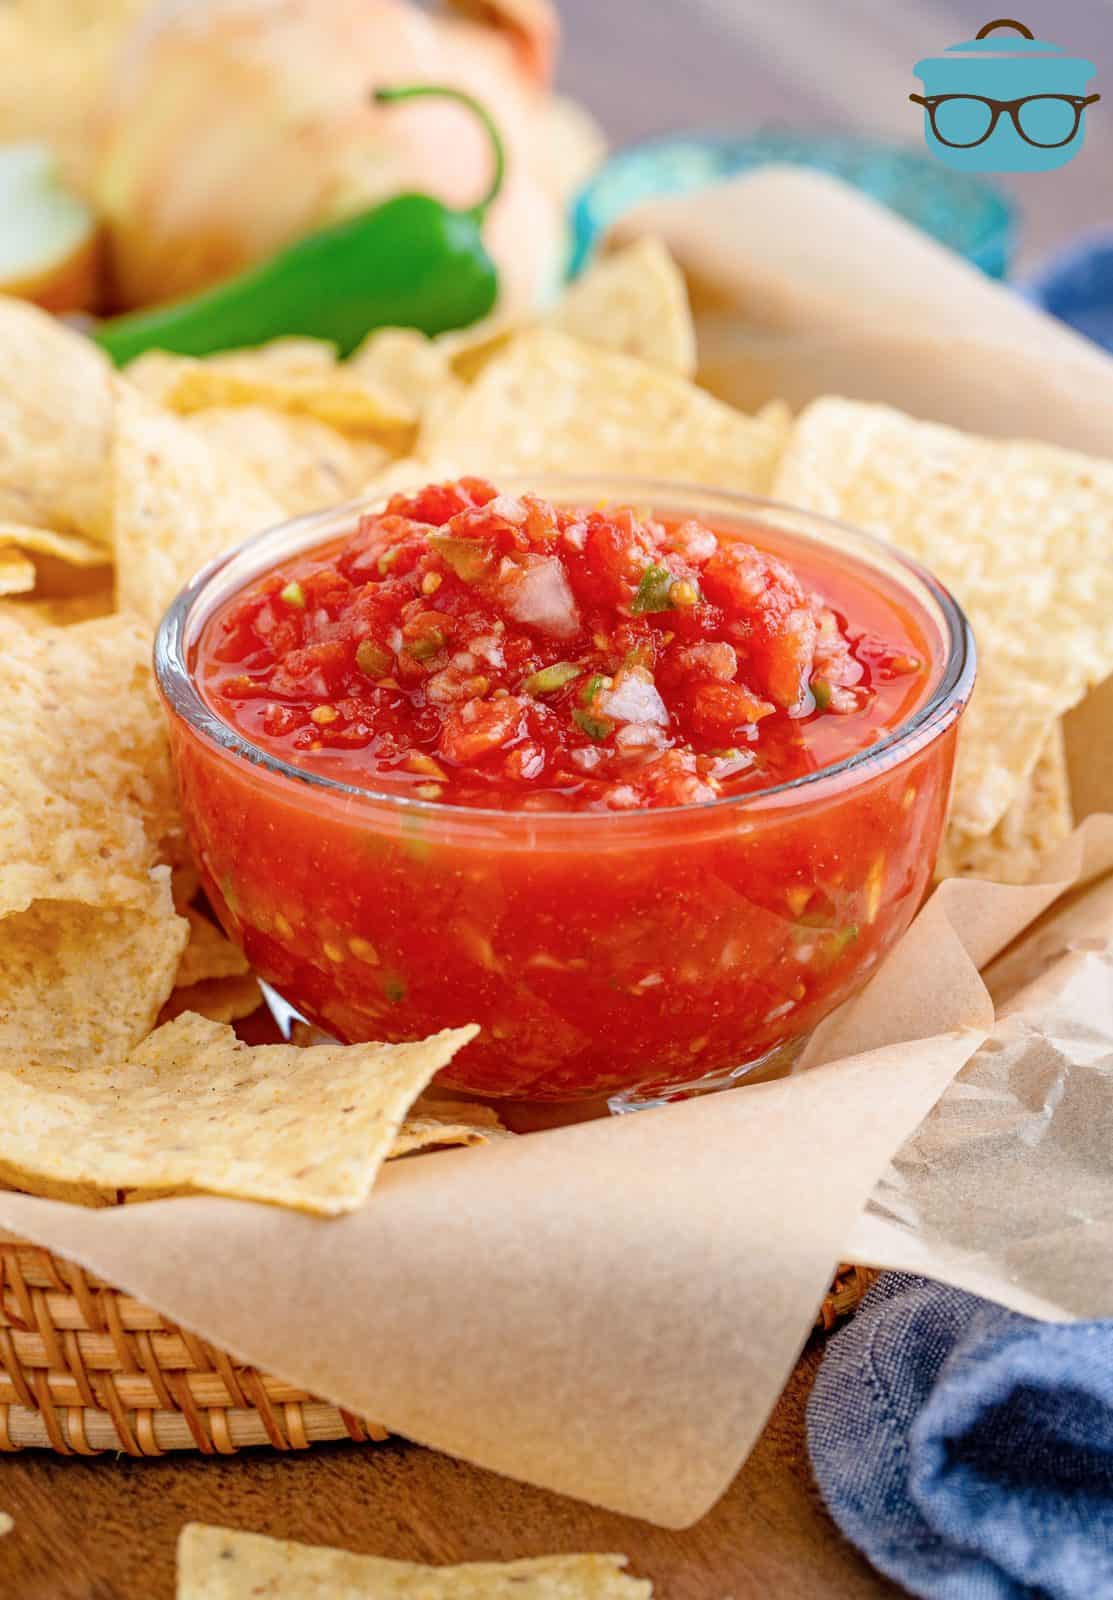 small, clear bowl of salsa in a basket with tortilla chips.